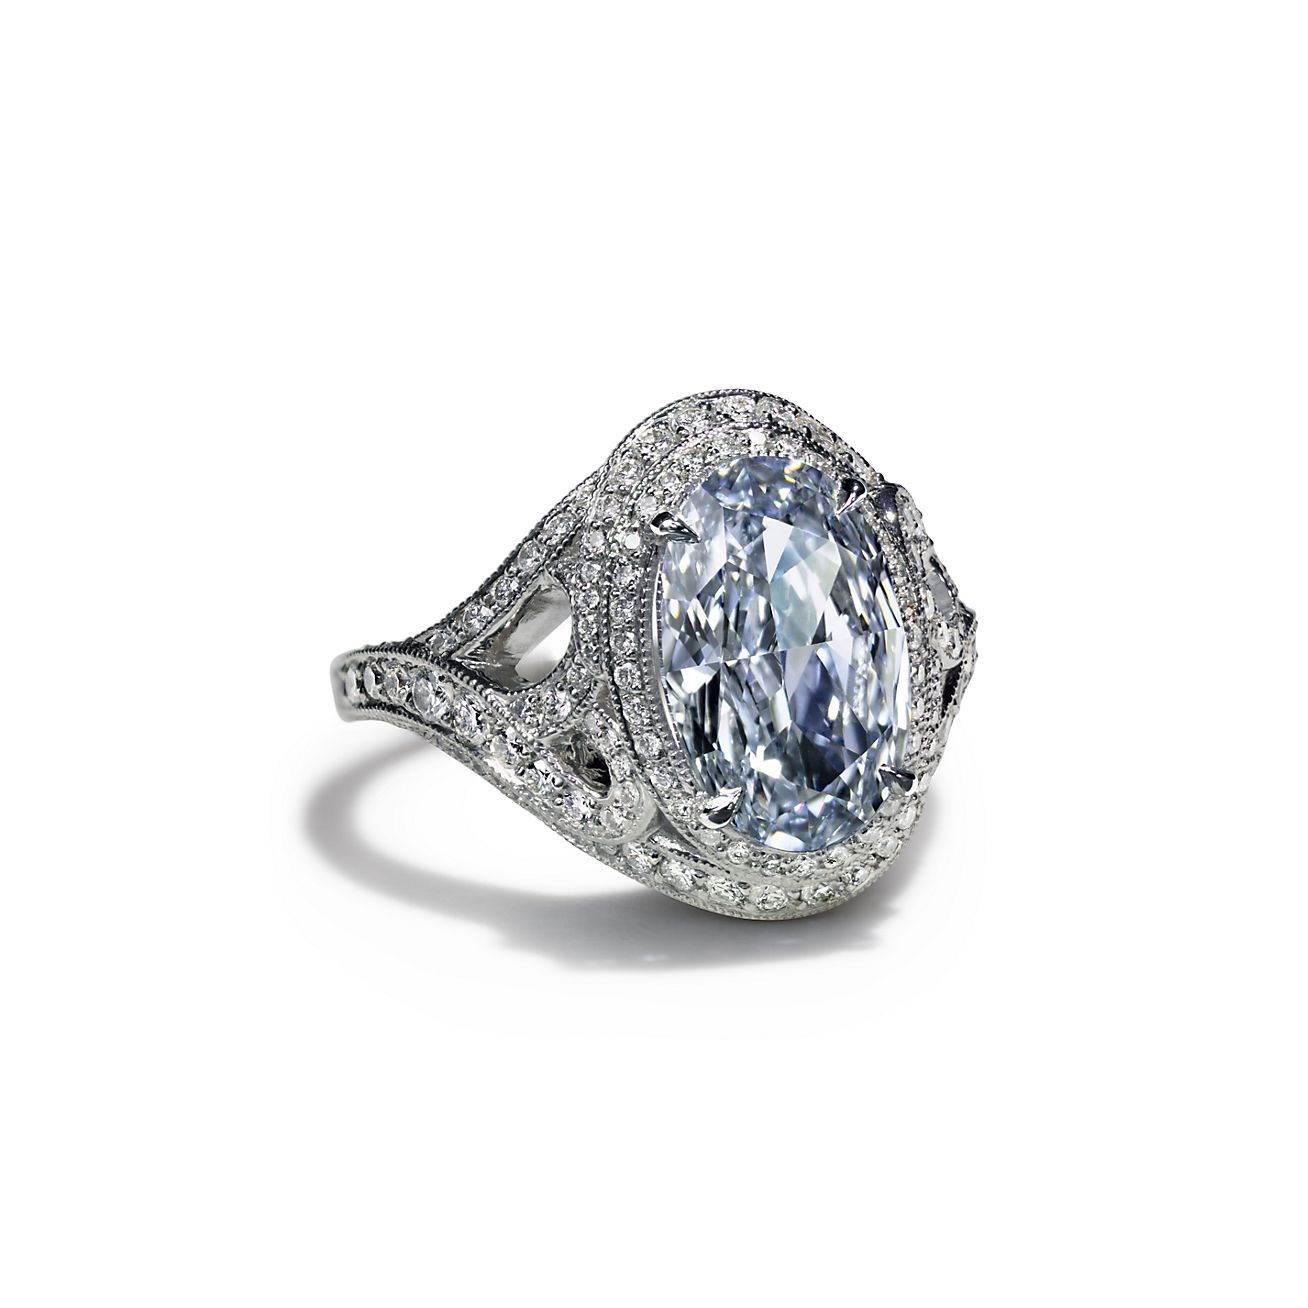 The Infinite Blue | Jewelry | Sotheby's